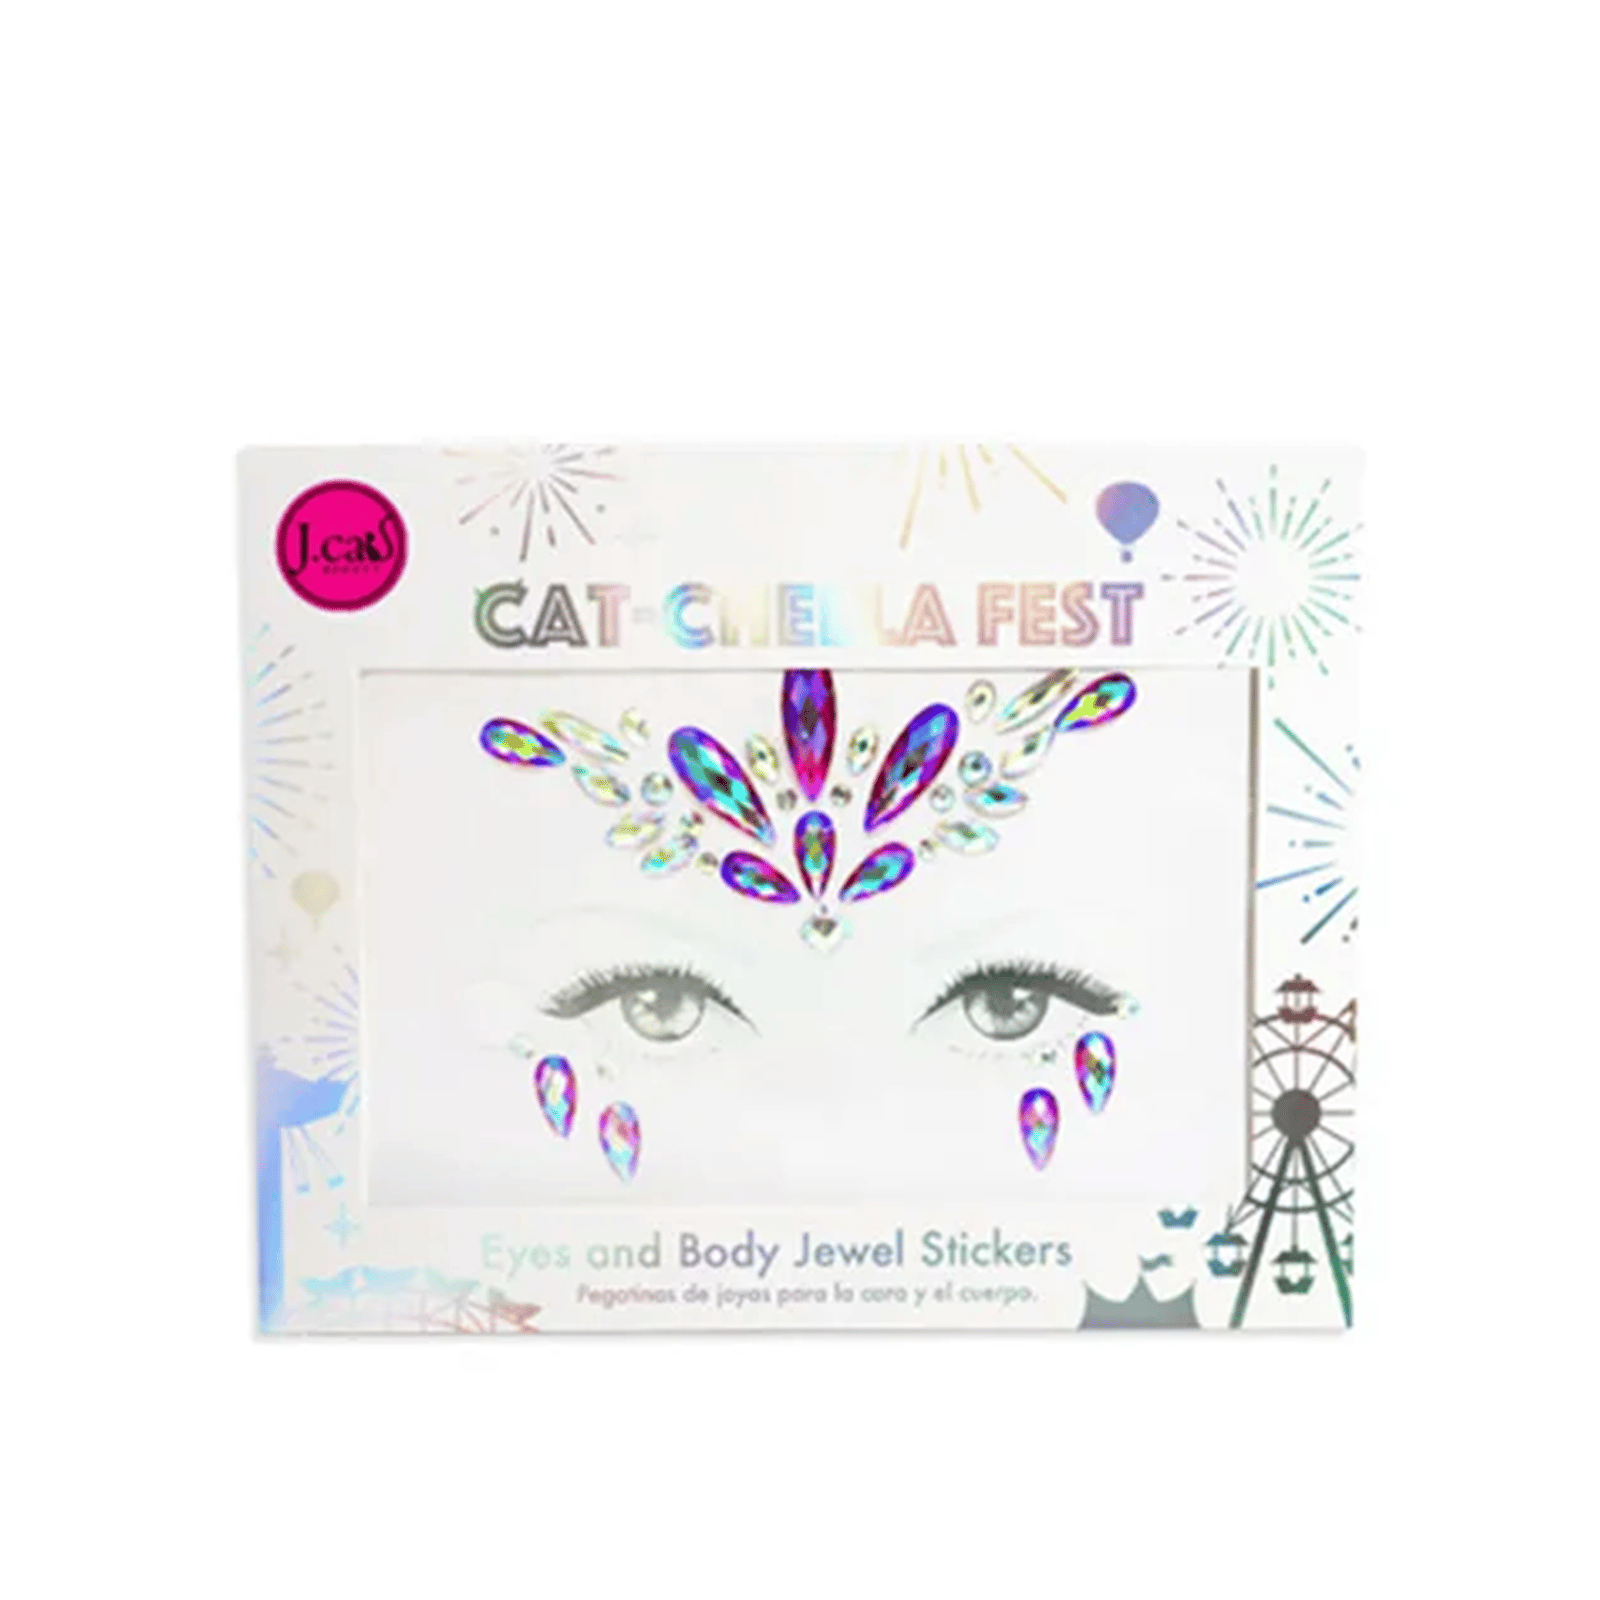 Buy J.Cat Cat-Chella Fest Face and Body Jewel Stickers · USA